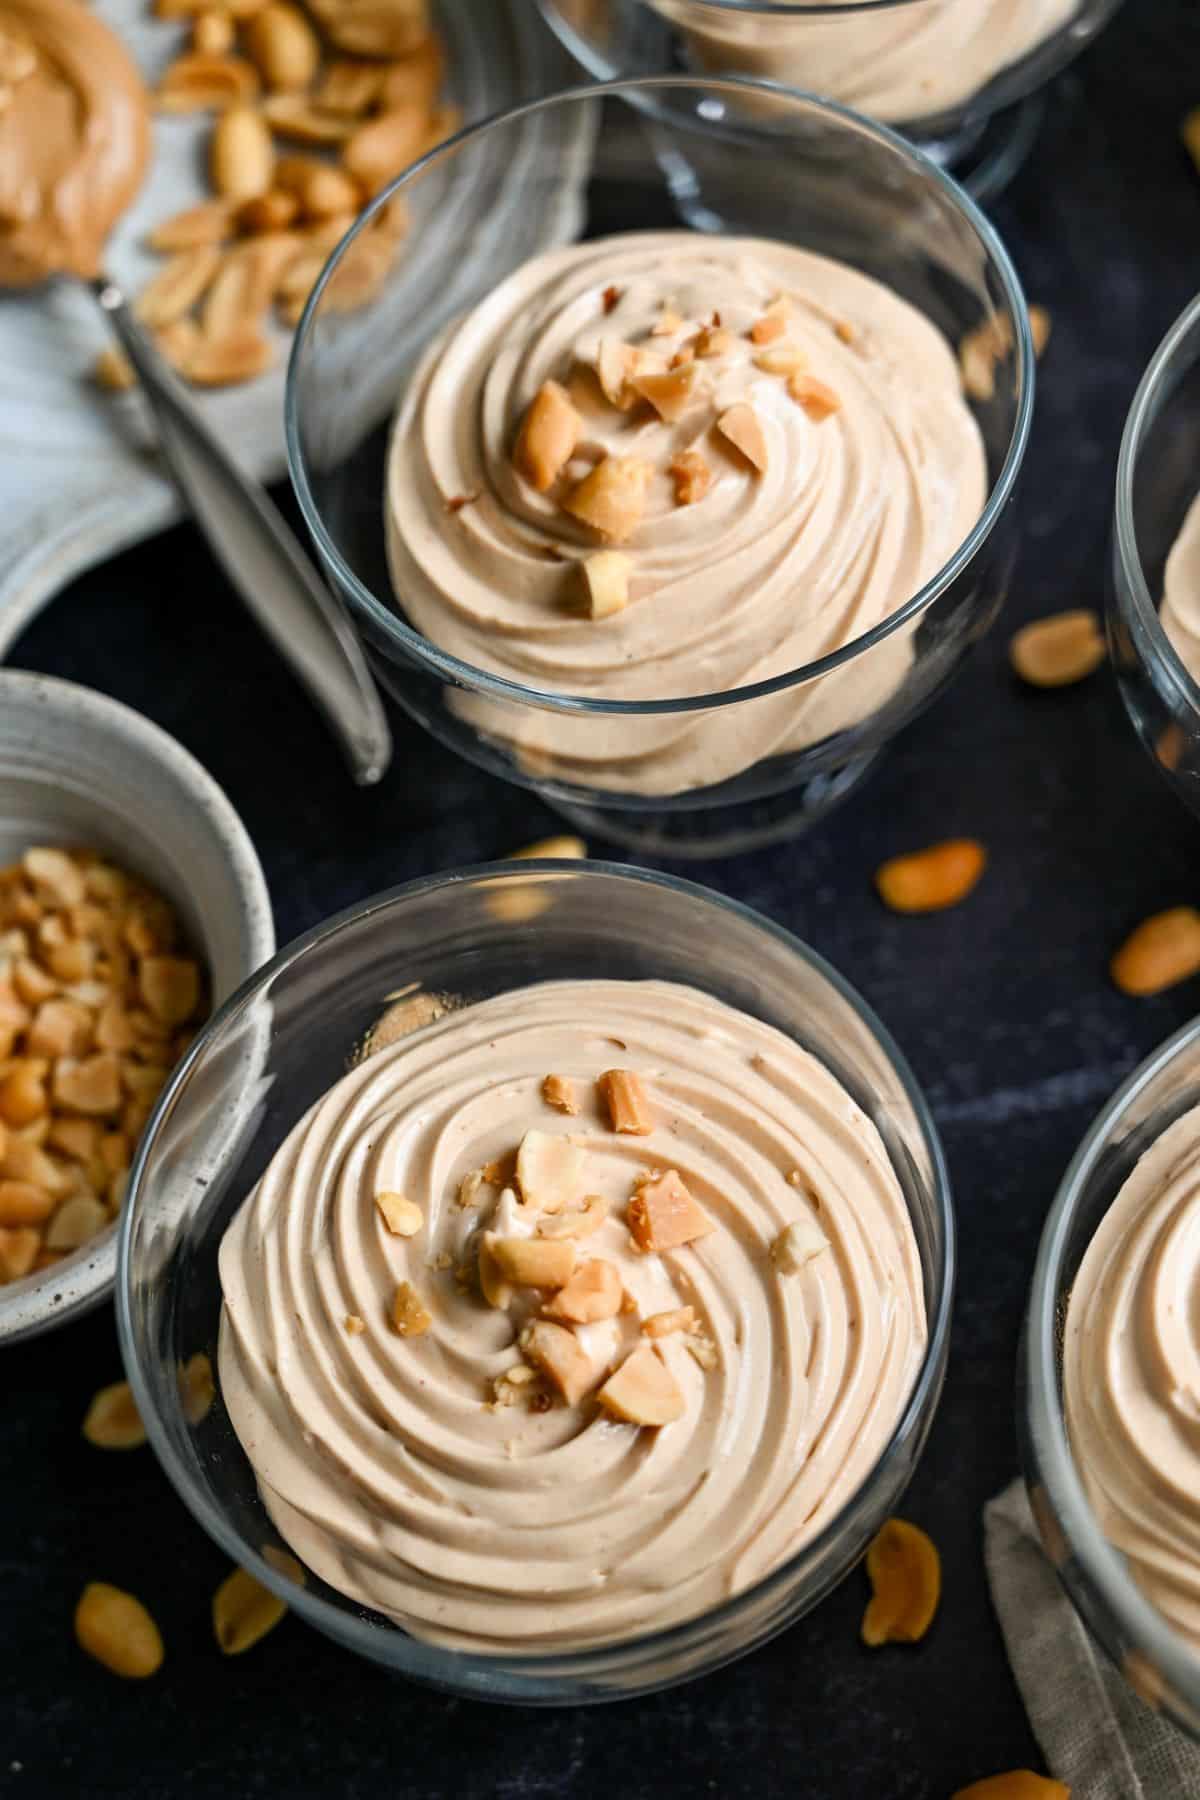 peanut butter mousse piped into dessert glasses with chopped peanuts on top with a dish of peanuts next to it